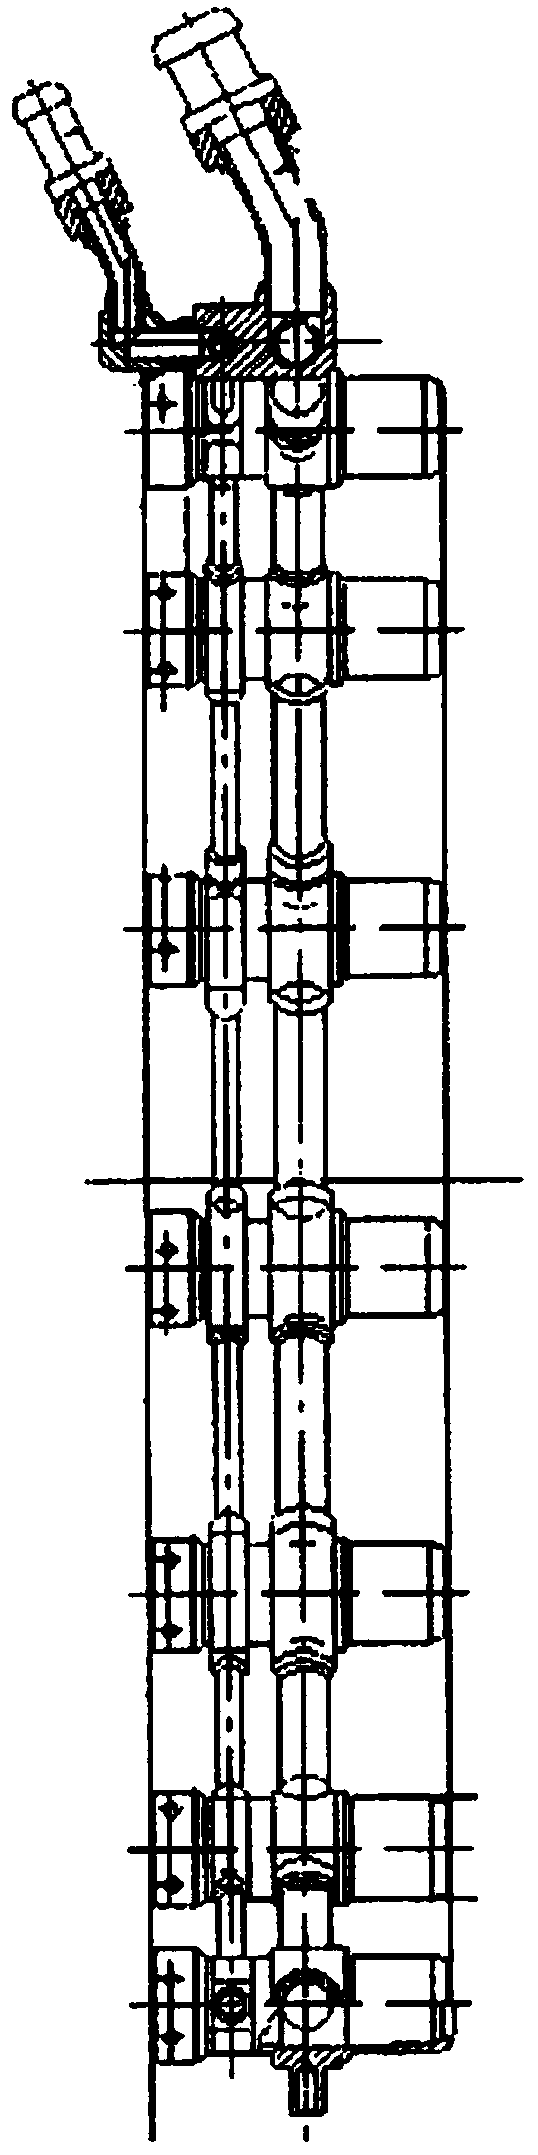 Method for machining fuel manifold with nozzles and of welding structure